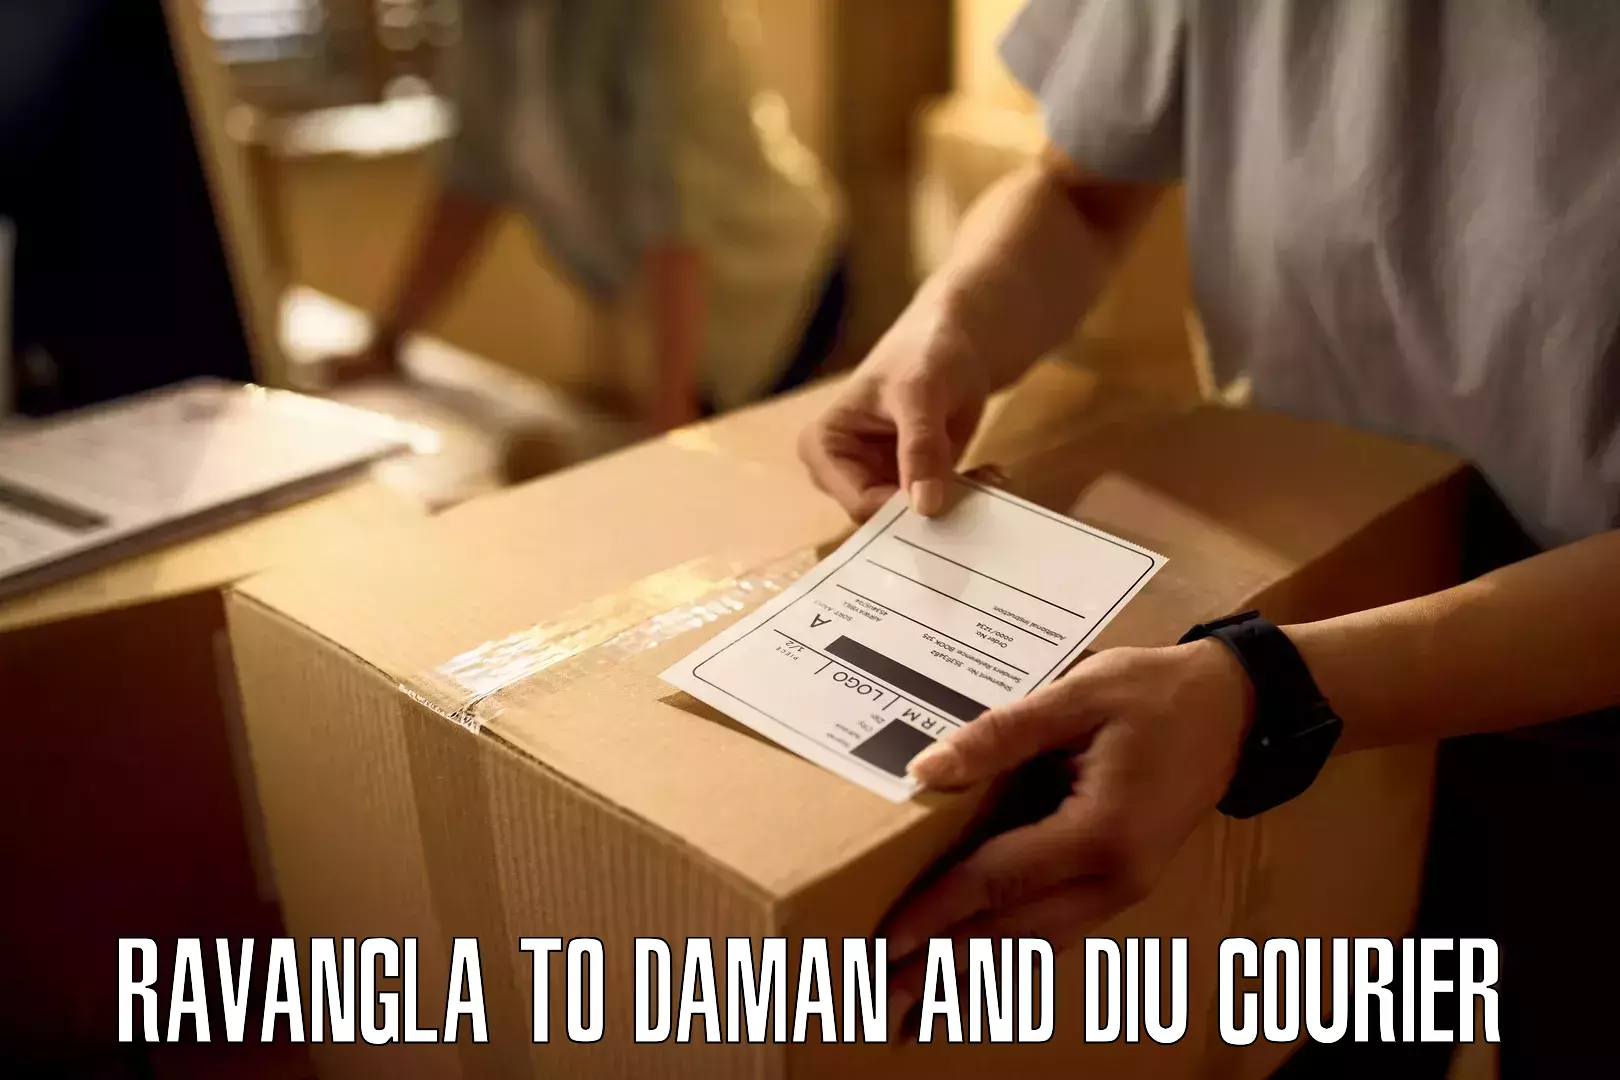 Personal courier services Ravangla to Daman